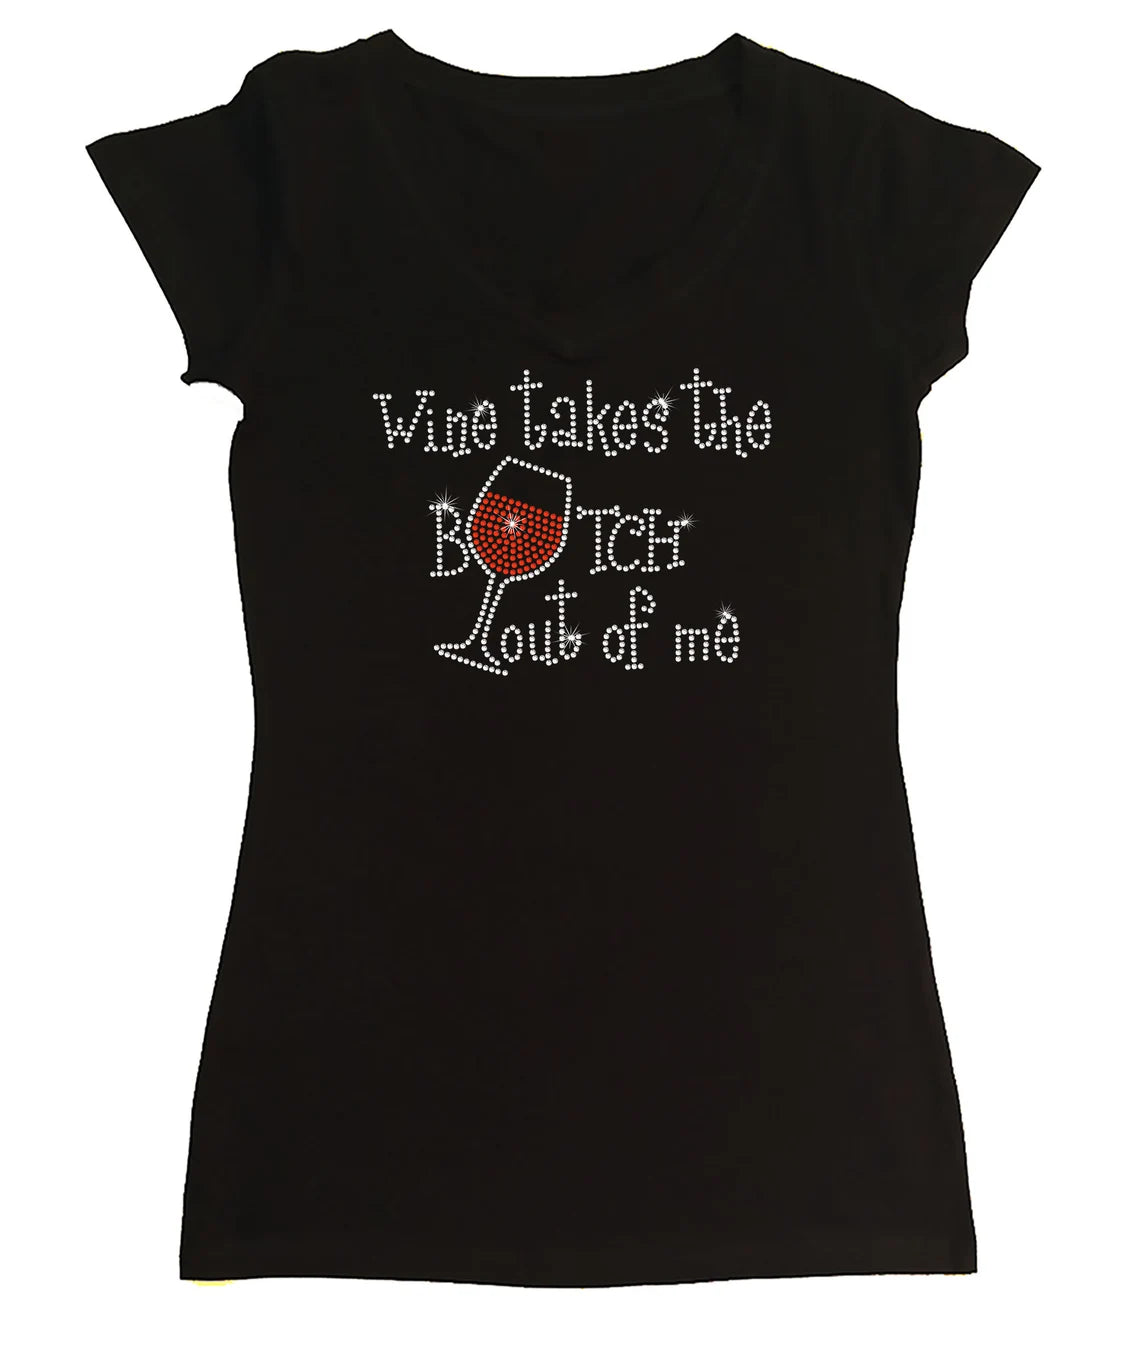 Women's Rhinestone Fitted Tight Snug Wine Takes the Bitch Out of Me - for Wine Tasting, Girls Trip, Wine shirt